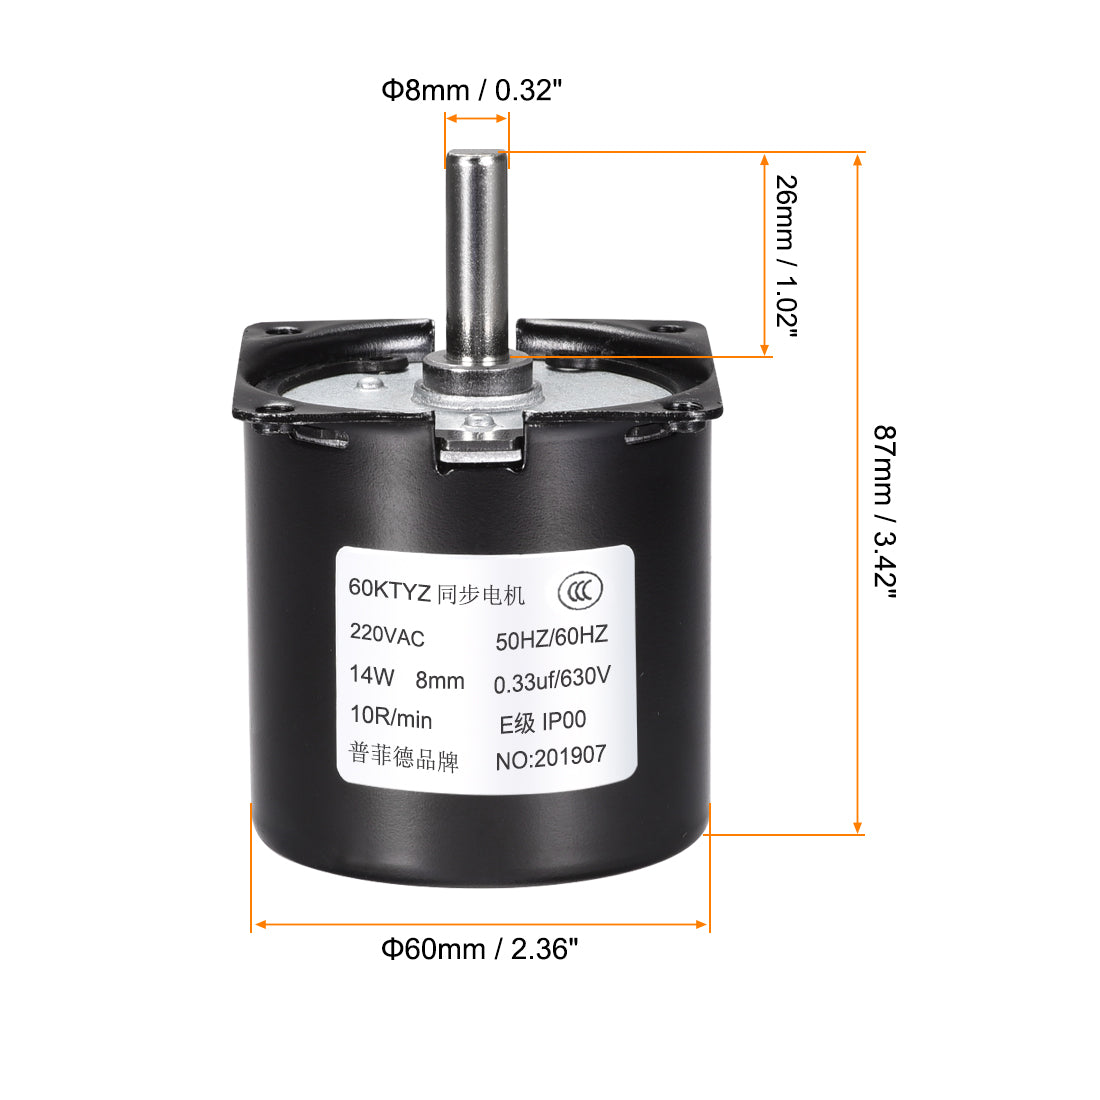 uxcell Uxcell AC 220V Electric Synchronous Motor Metal Gear Turntable /C 10RPM 50-60HZ 14W 8mm Dia Central Shaft